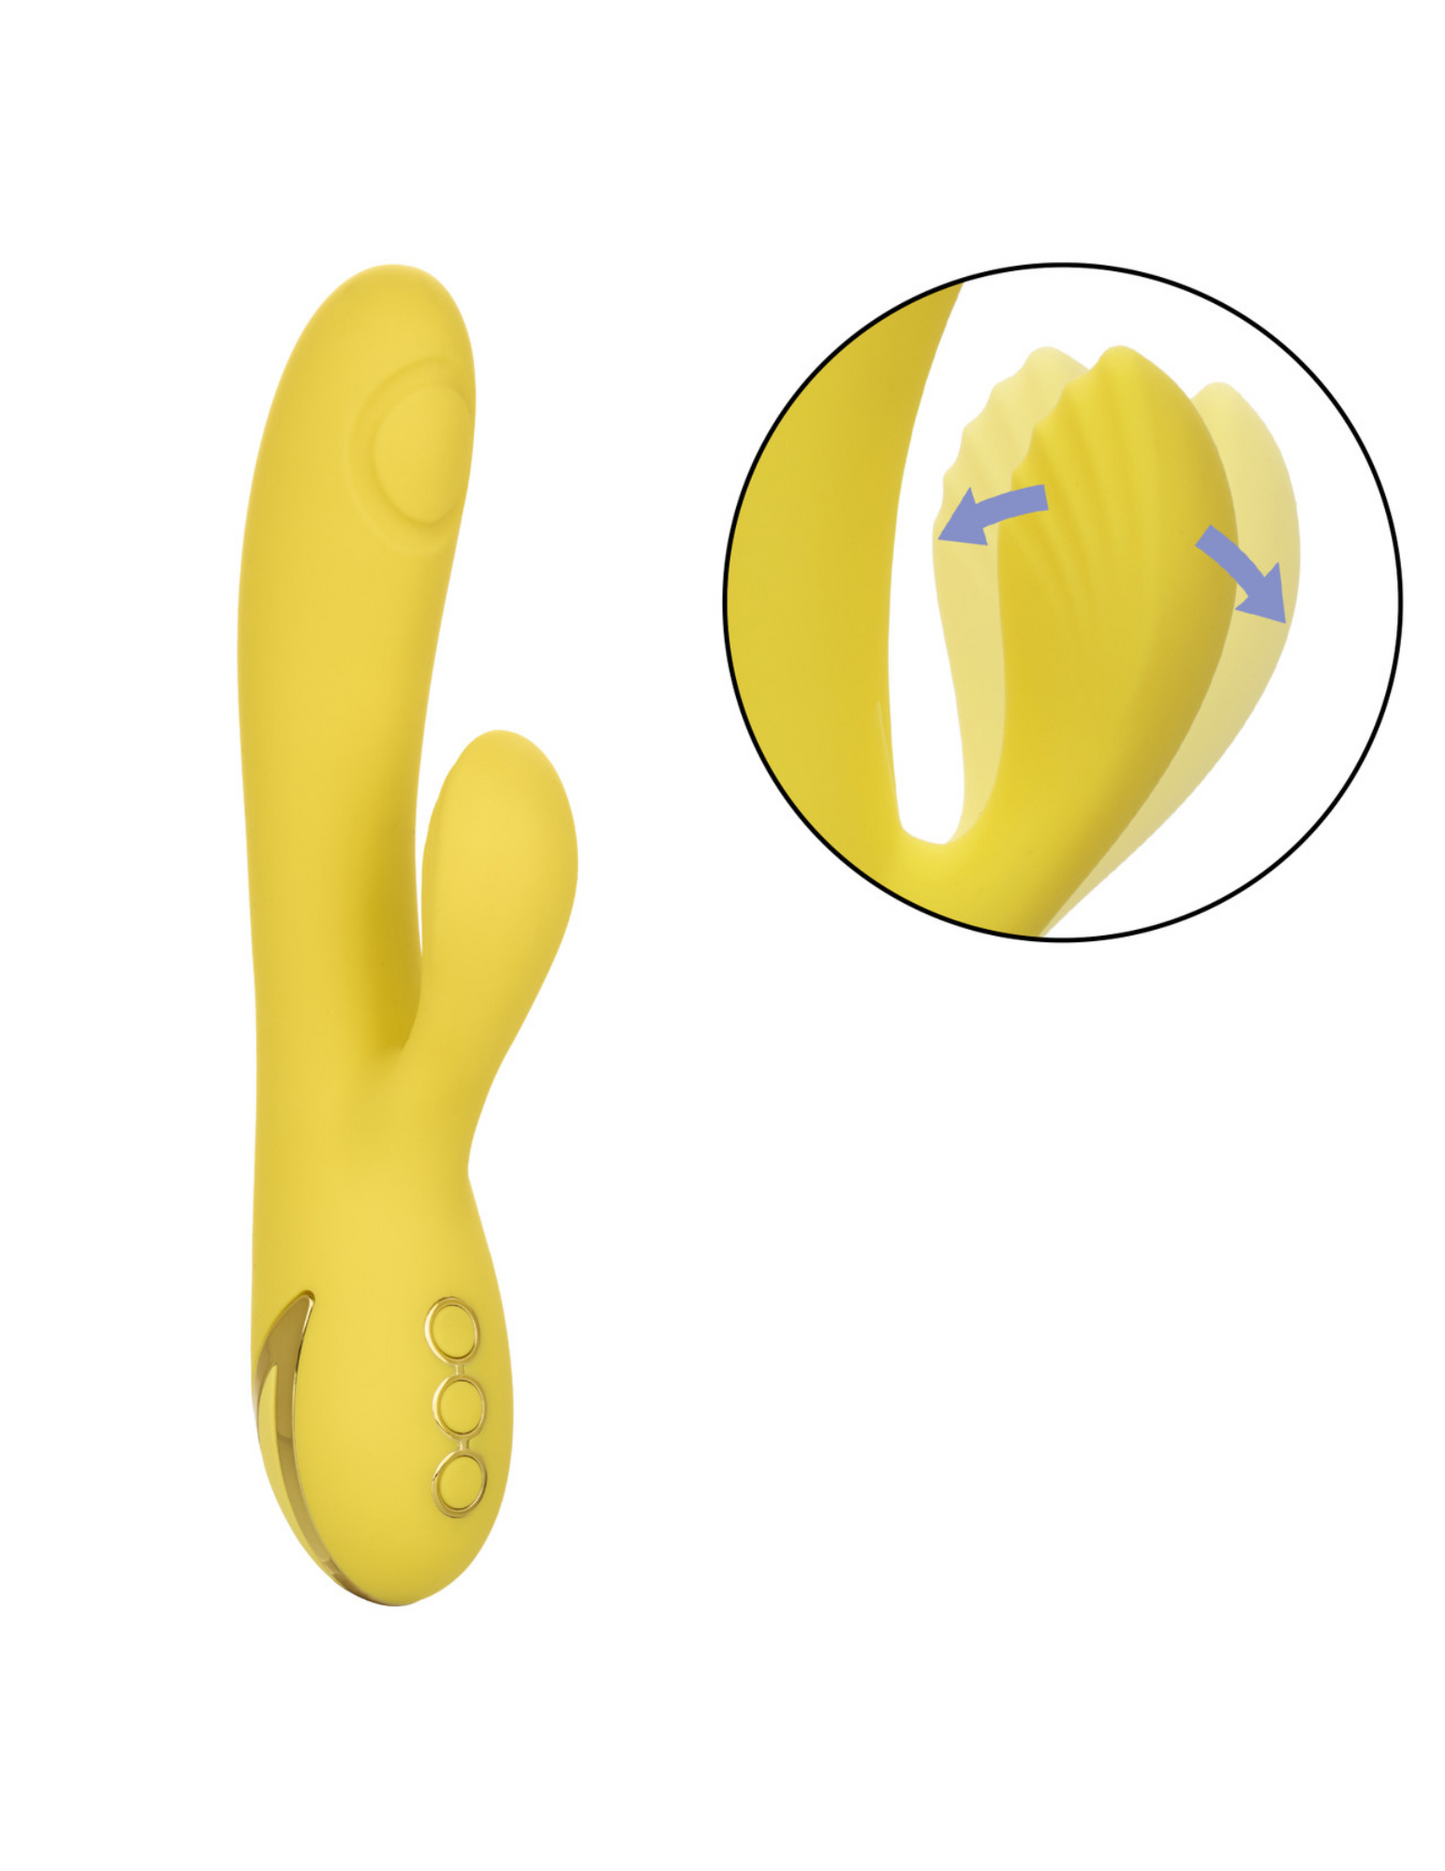 Image shows the California Dreaming San Diego Seduction Vibrator (yellow) from CalExotics, highlighting the clitoral stimulator showing how it moves back and forth.